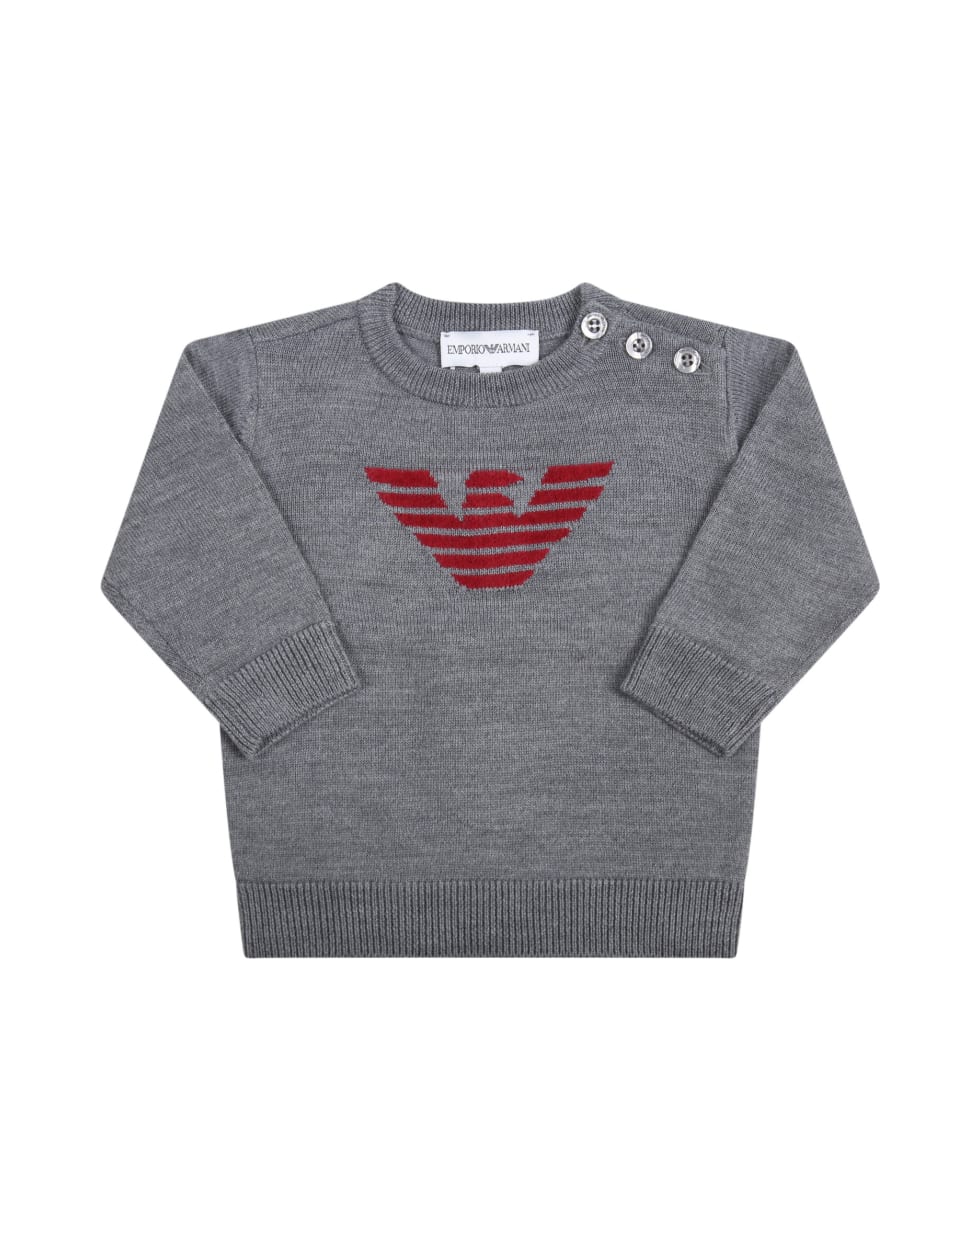 Armani Collezioni Grey Sweater For Baby Boy With Eagle - Grey